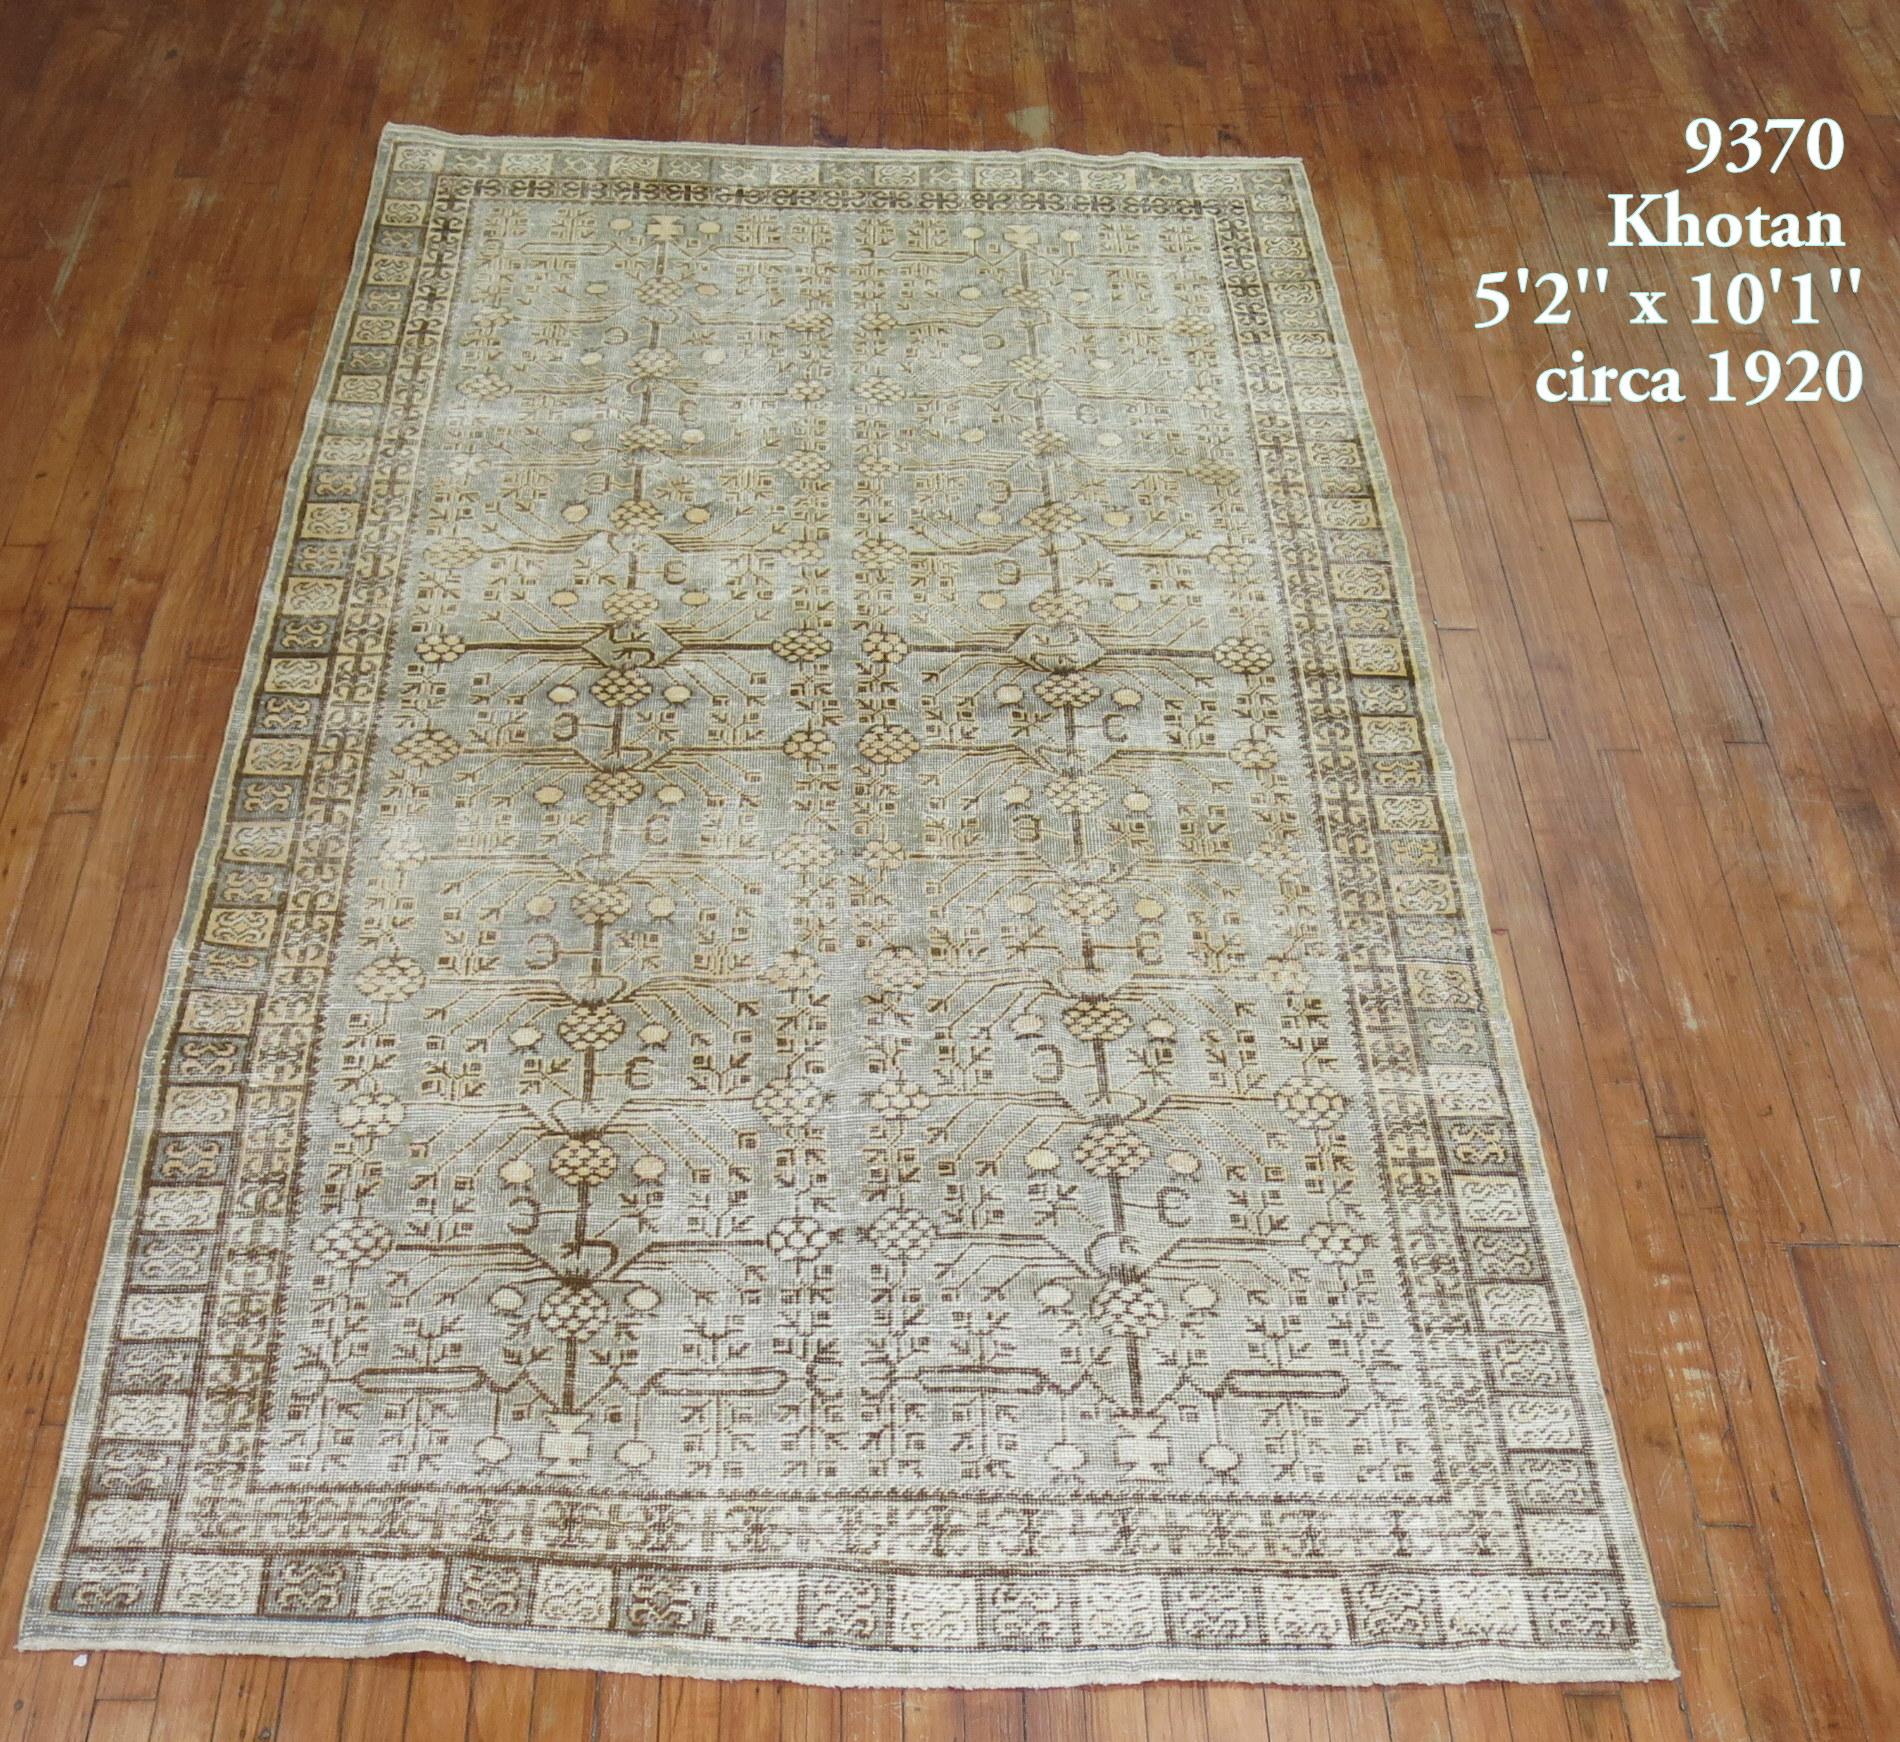 Chinoiserie Khotan Rug in Celadon Green and Brown